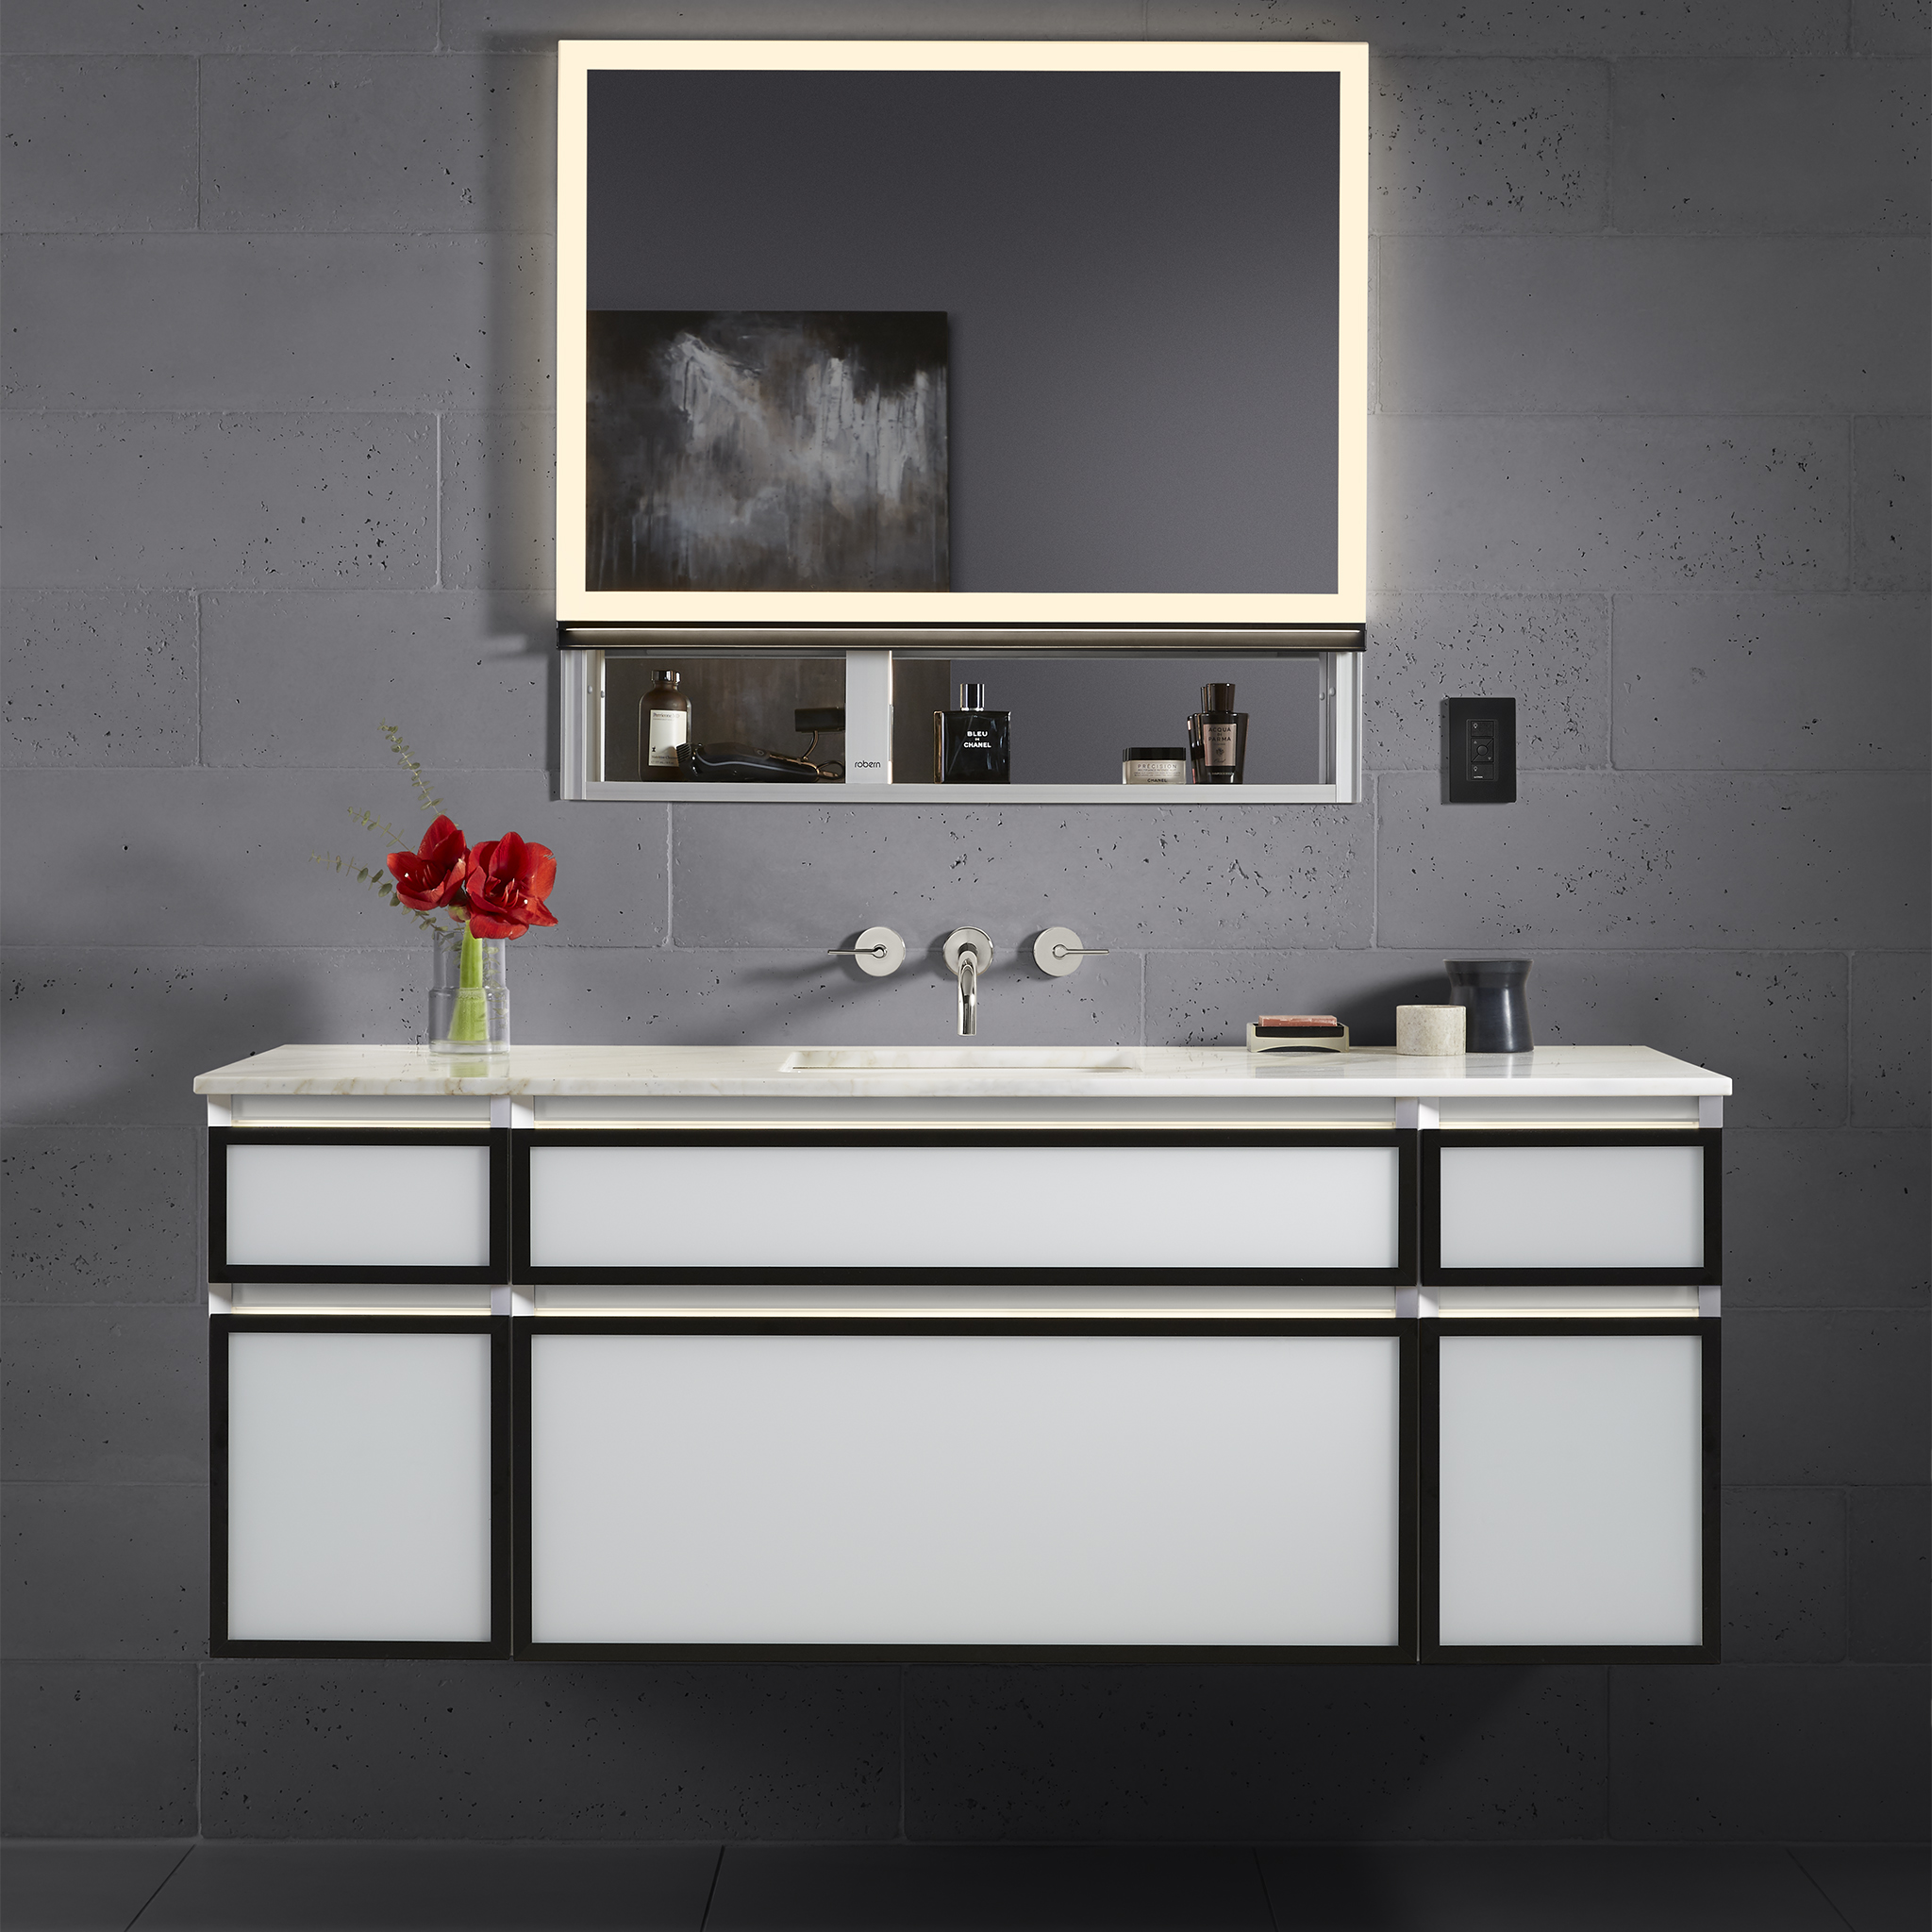 Robern M Series mirrored cabinet with an integrated LED night light